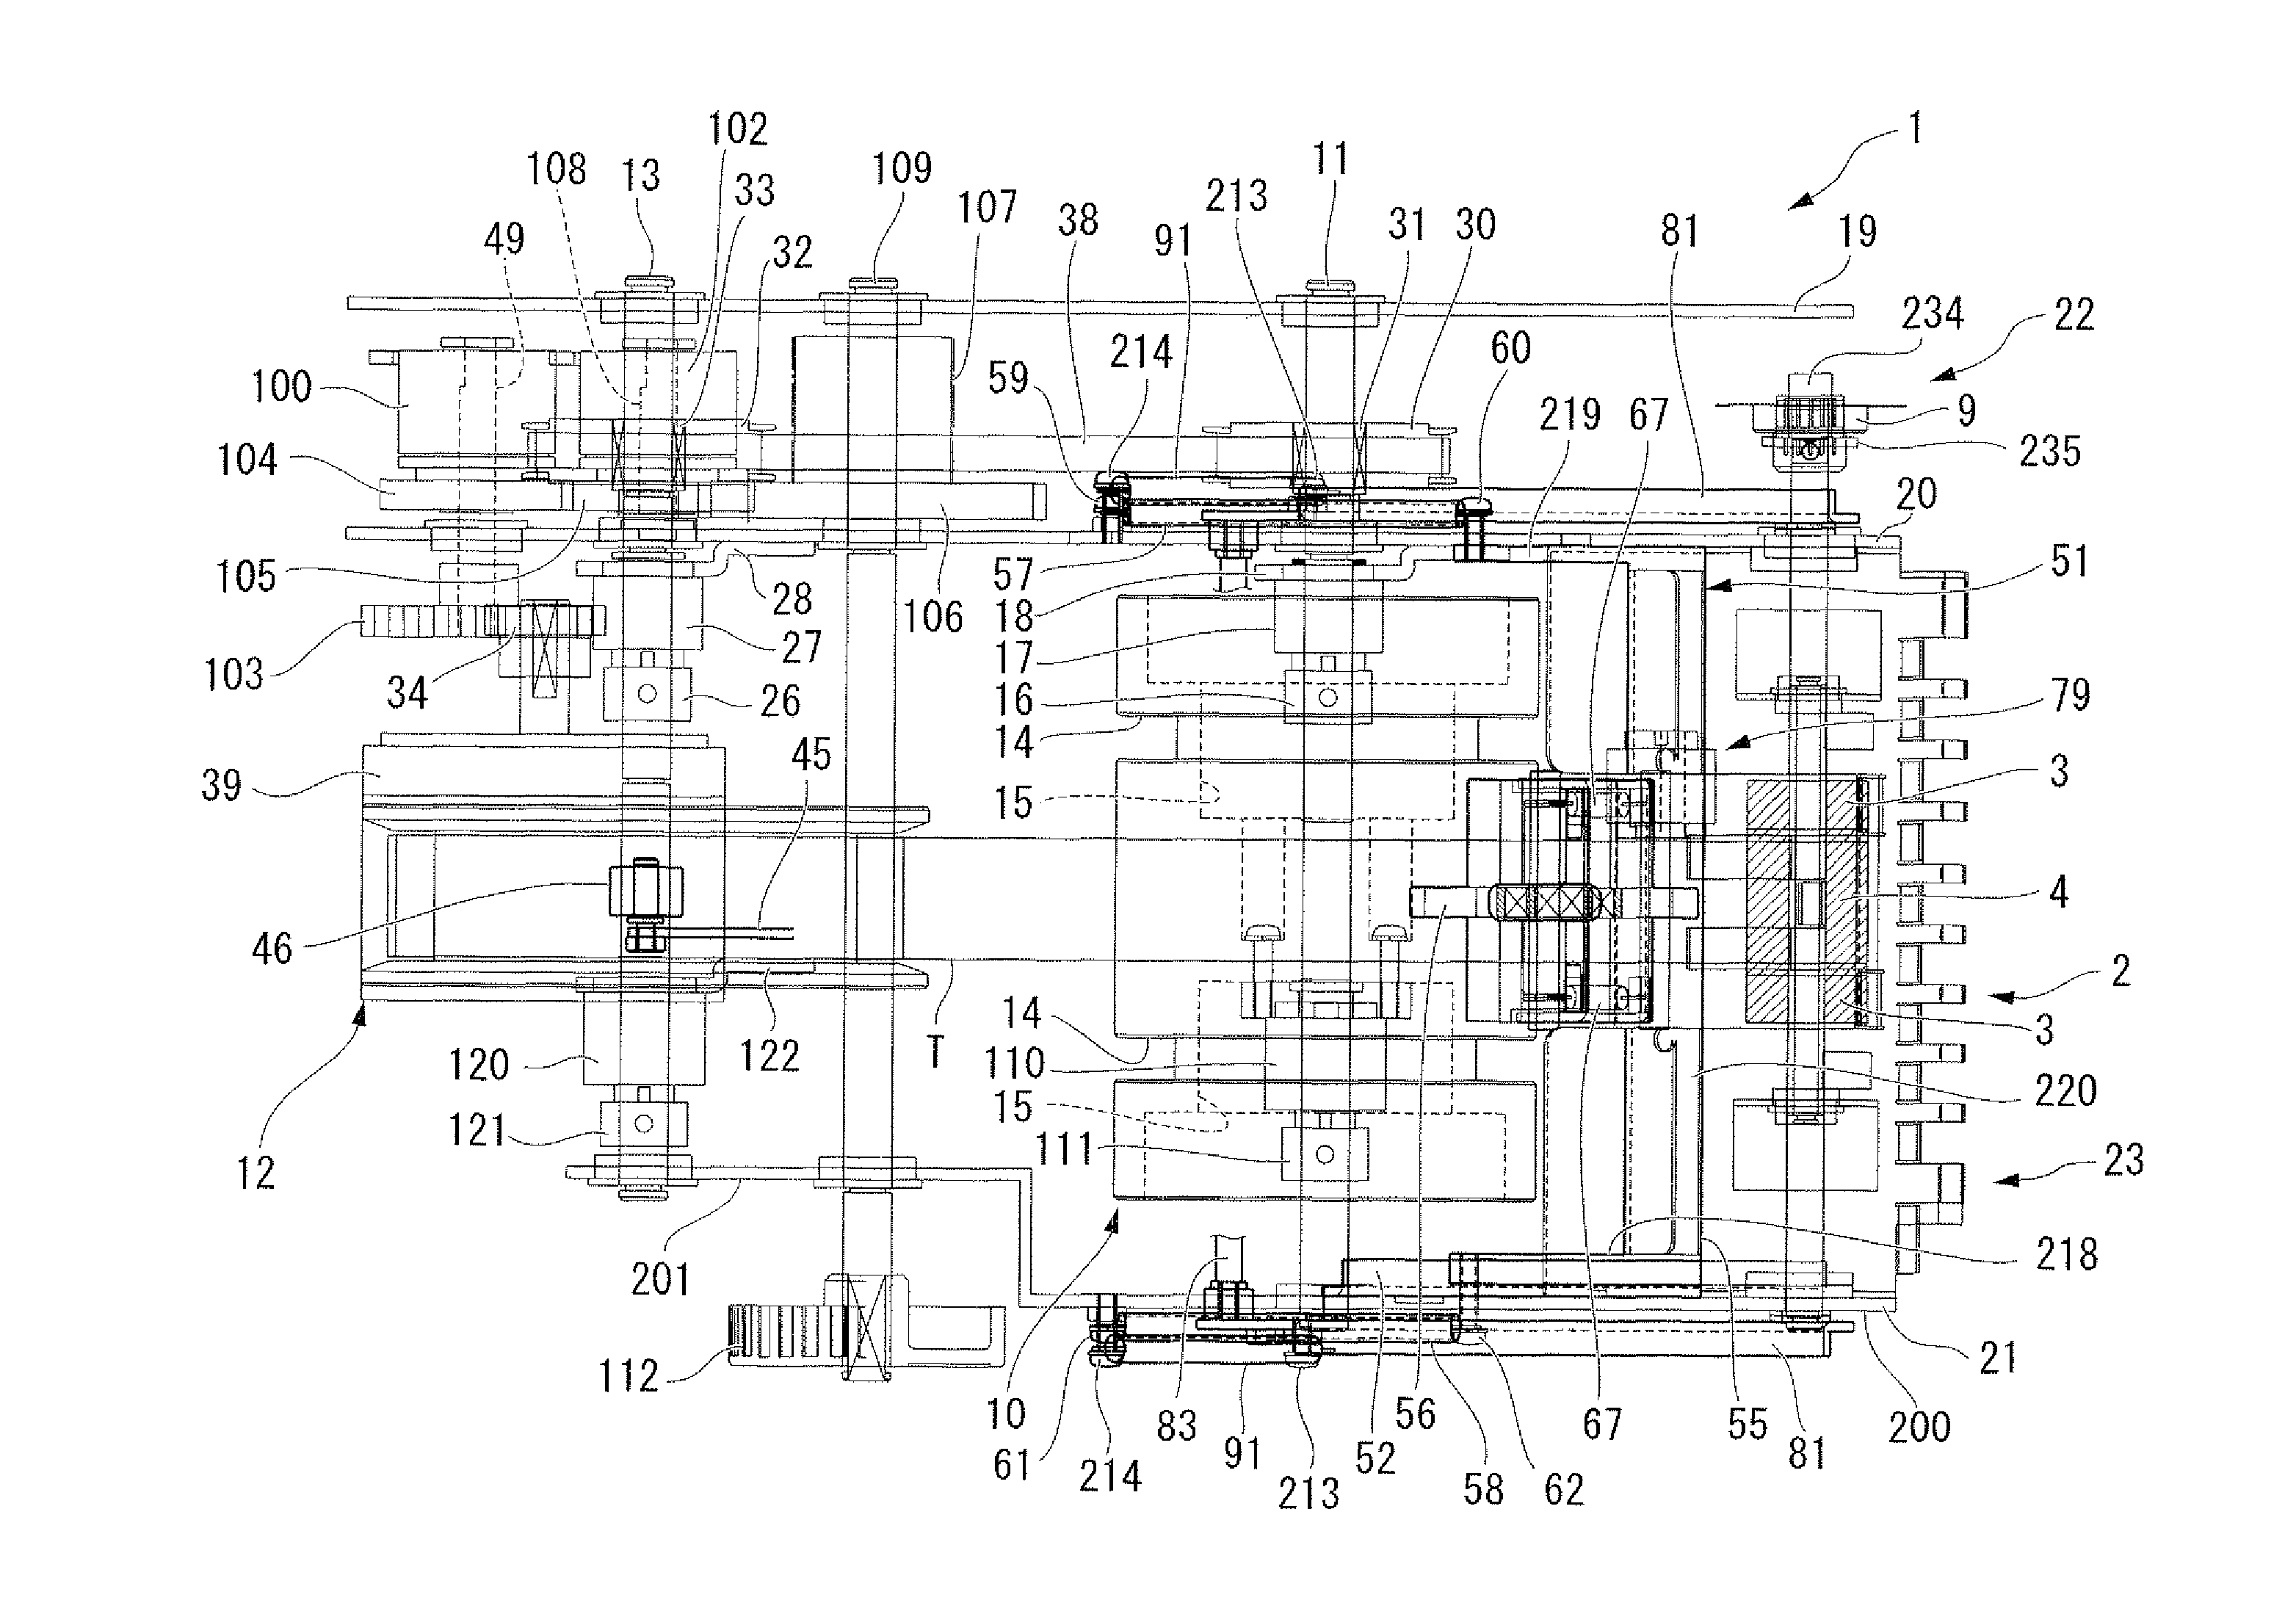 Sheet paper storage and dispensing device